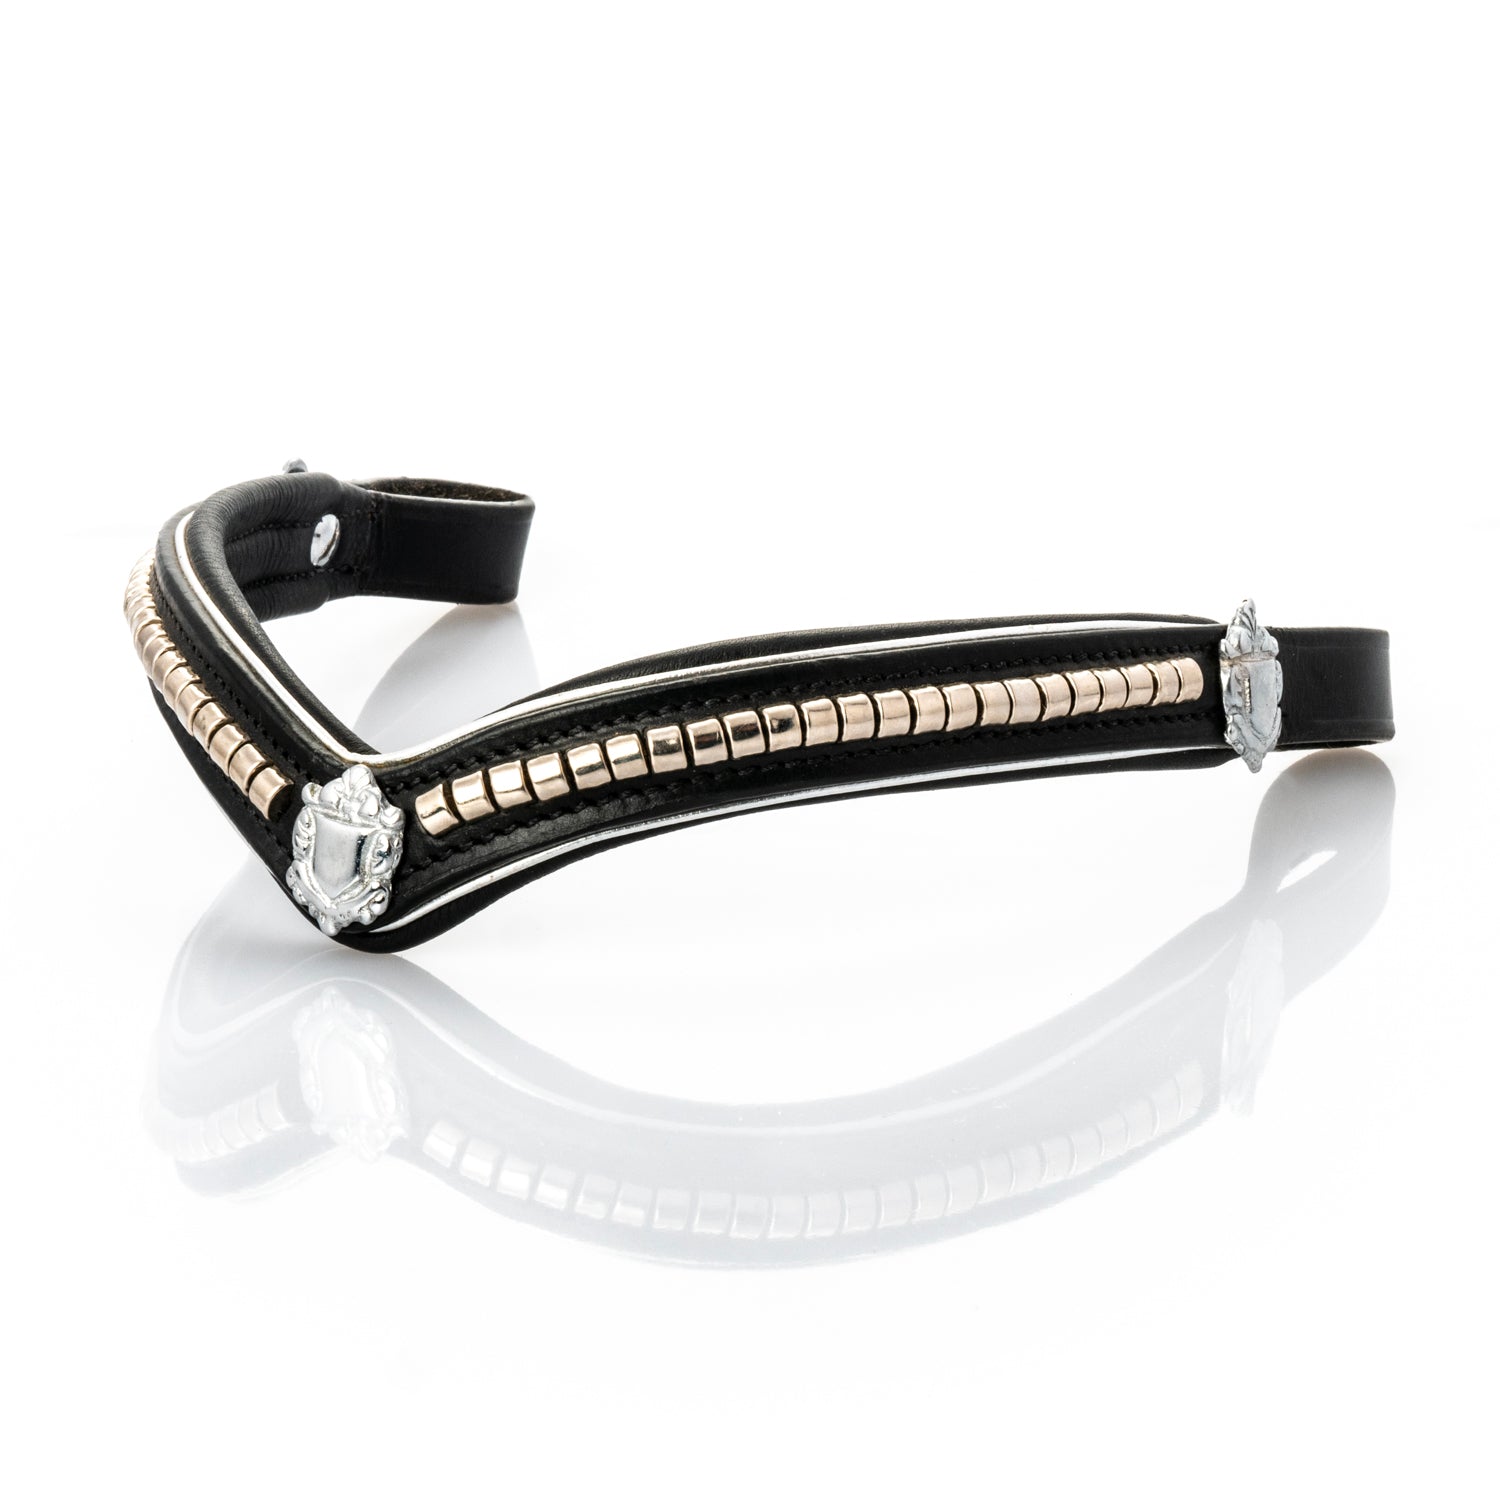 S/s Clincher with Shields and Silver Piping V Gel Browband - Black